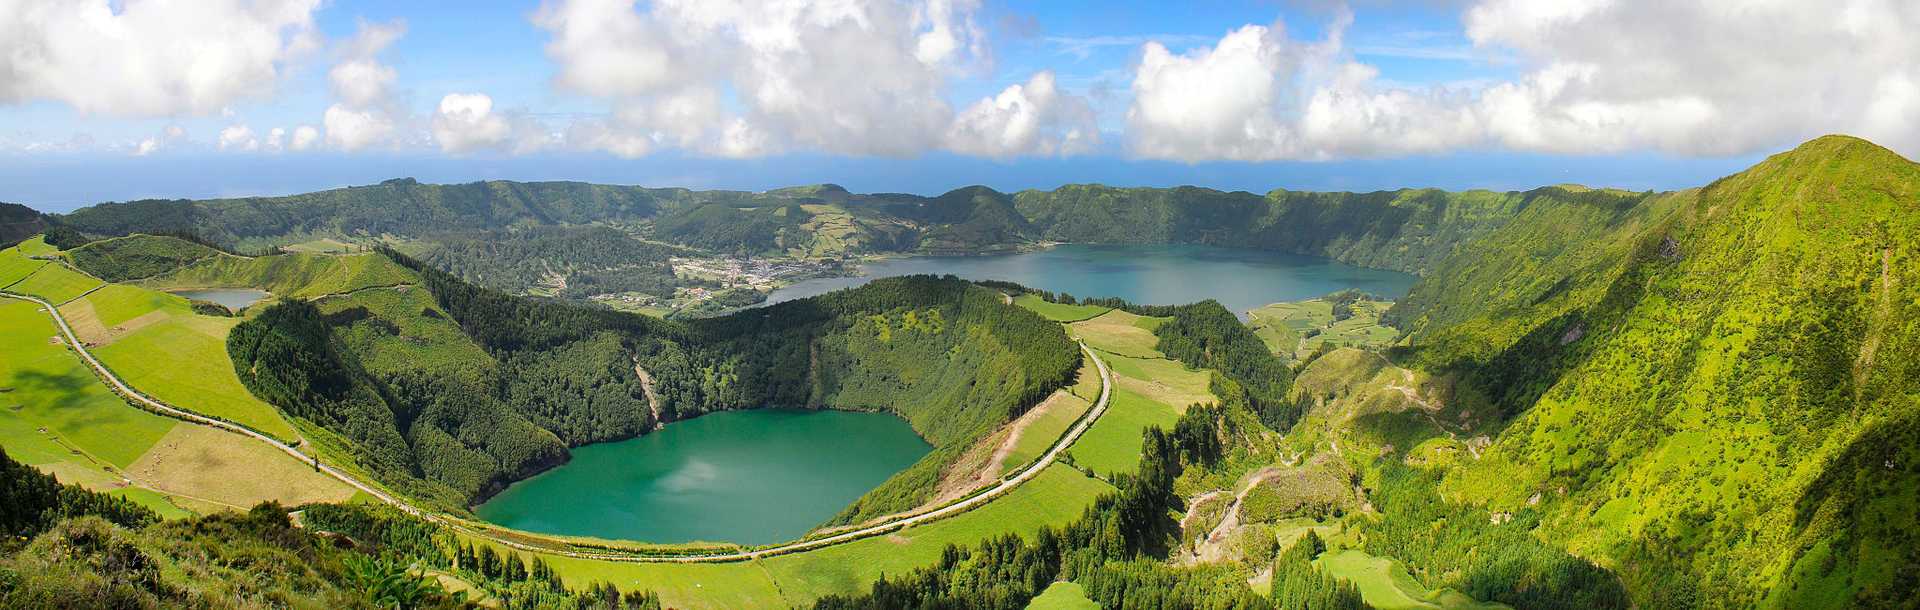 Sao Miguel Island in the Azores, Portugal